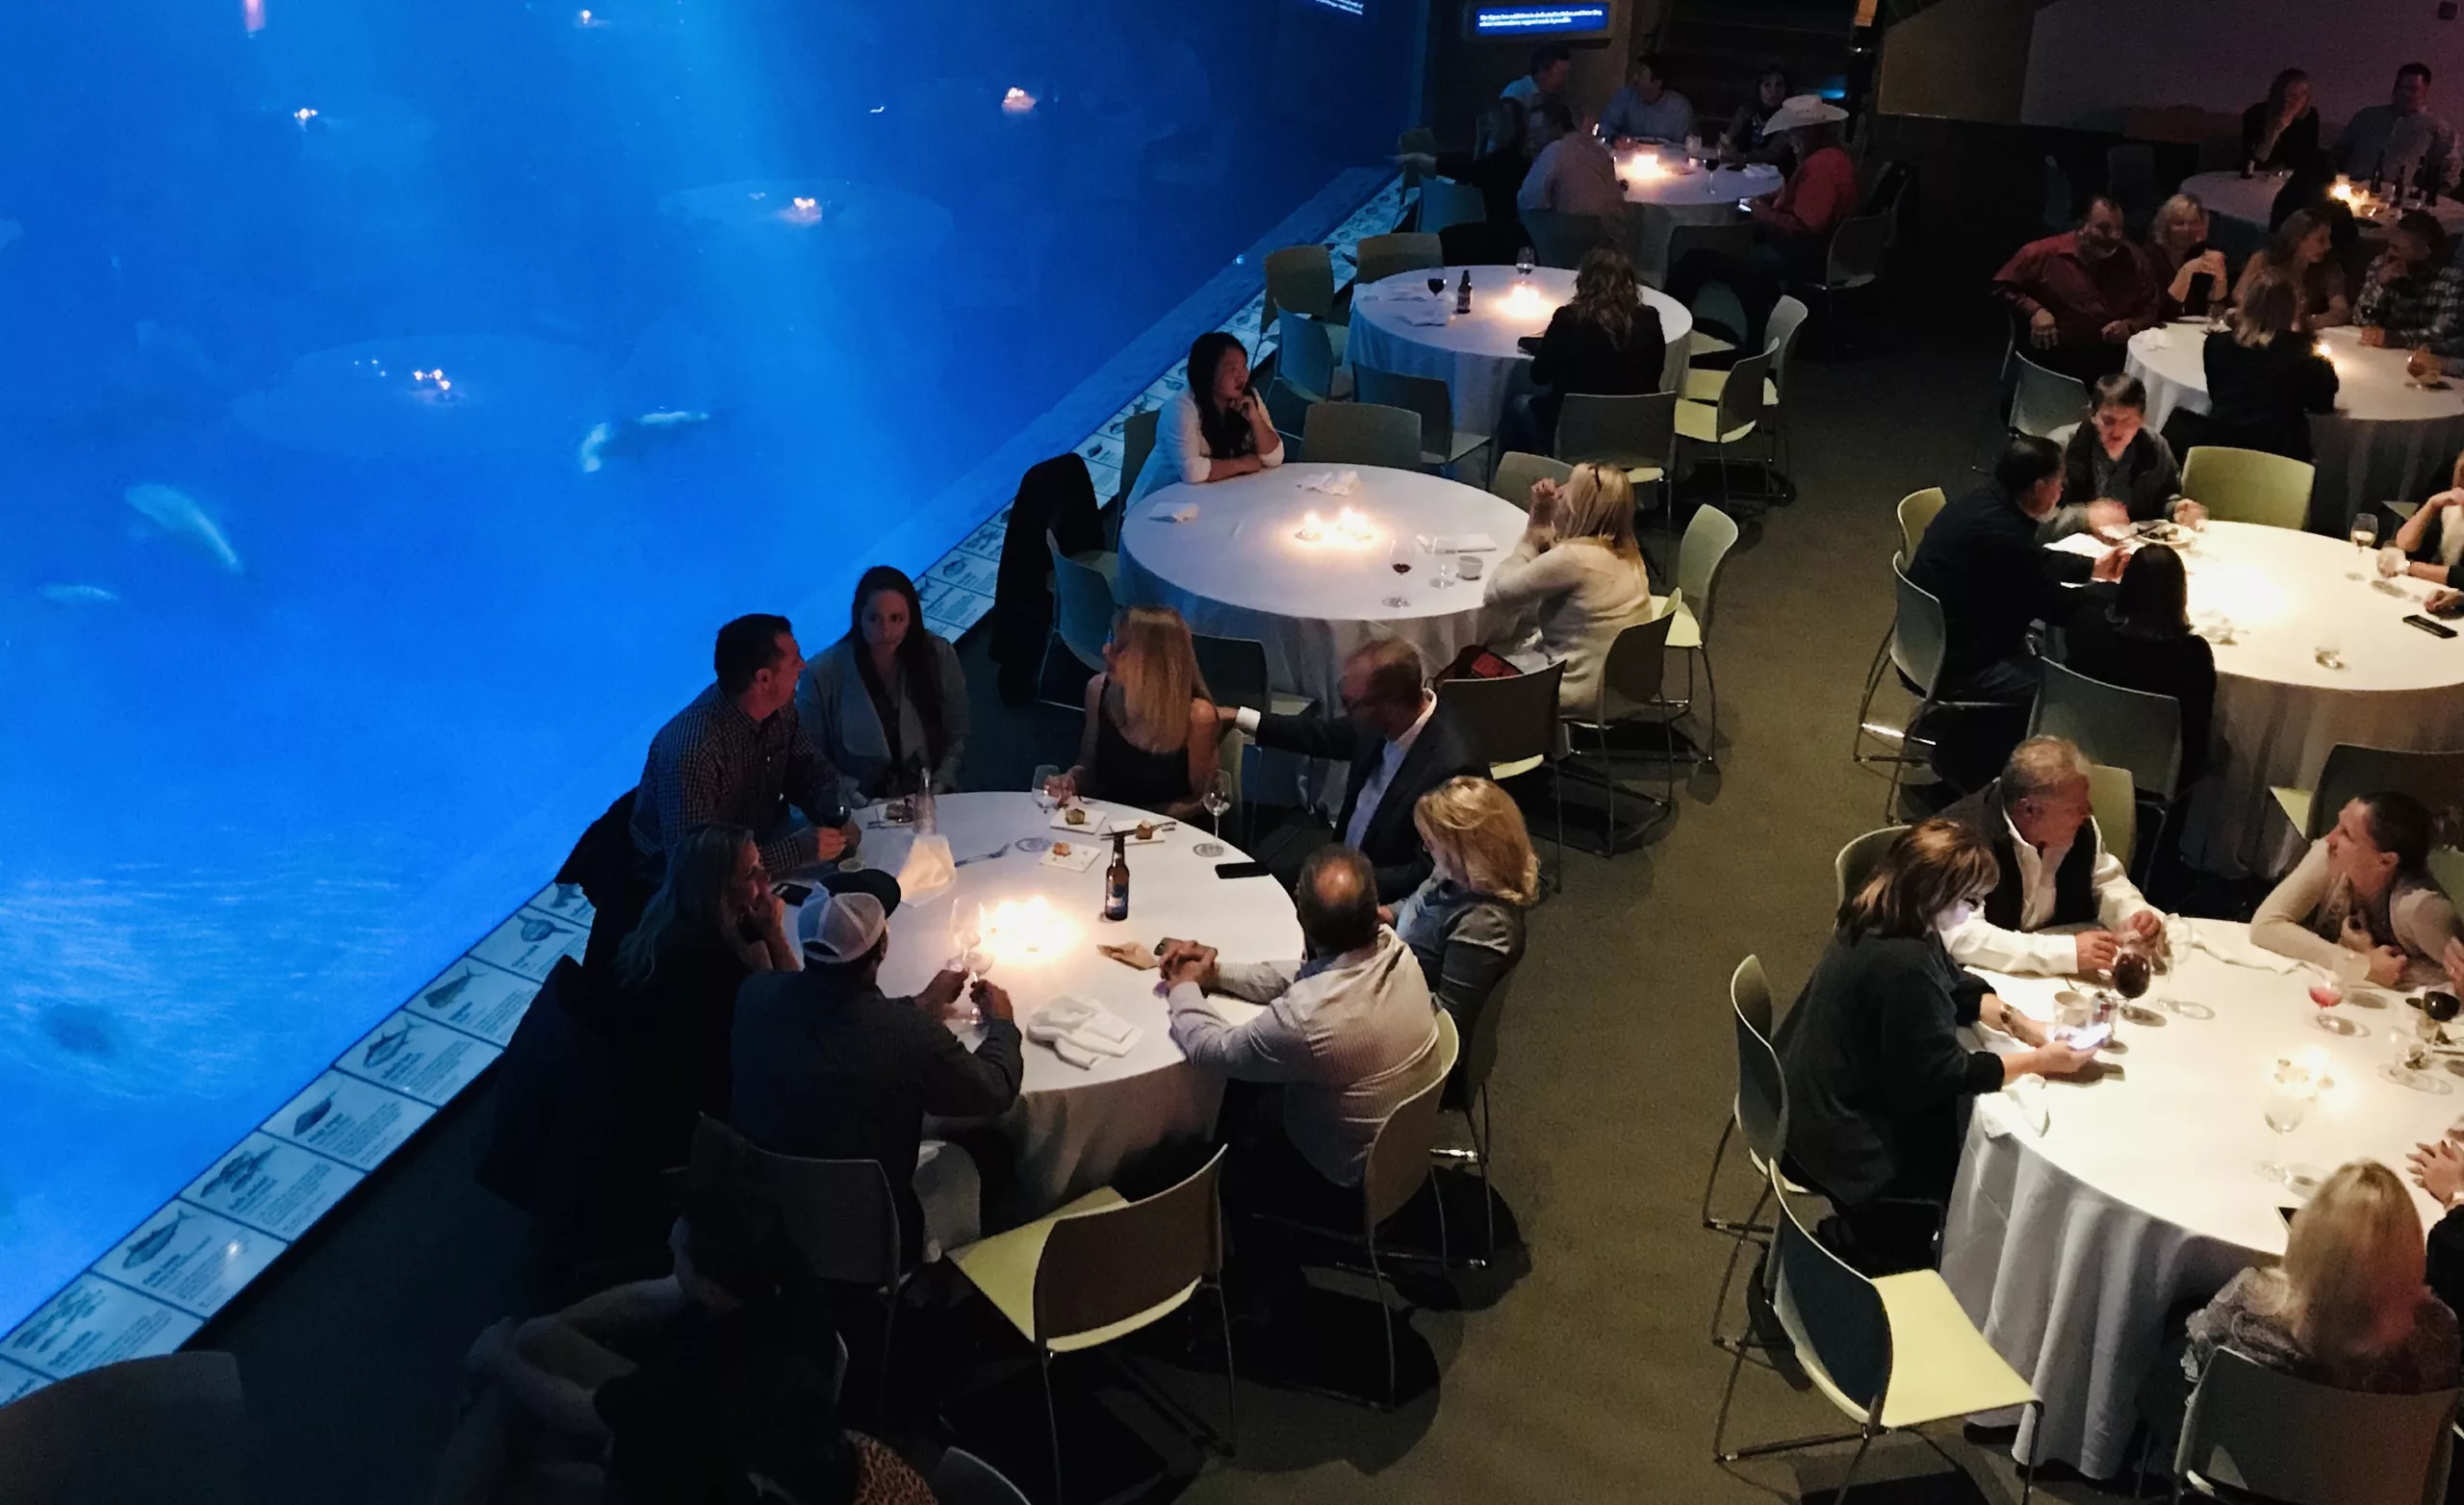 Dining experience at an underwater-themed restaurant with visitors at tables.